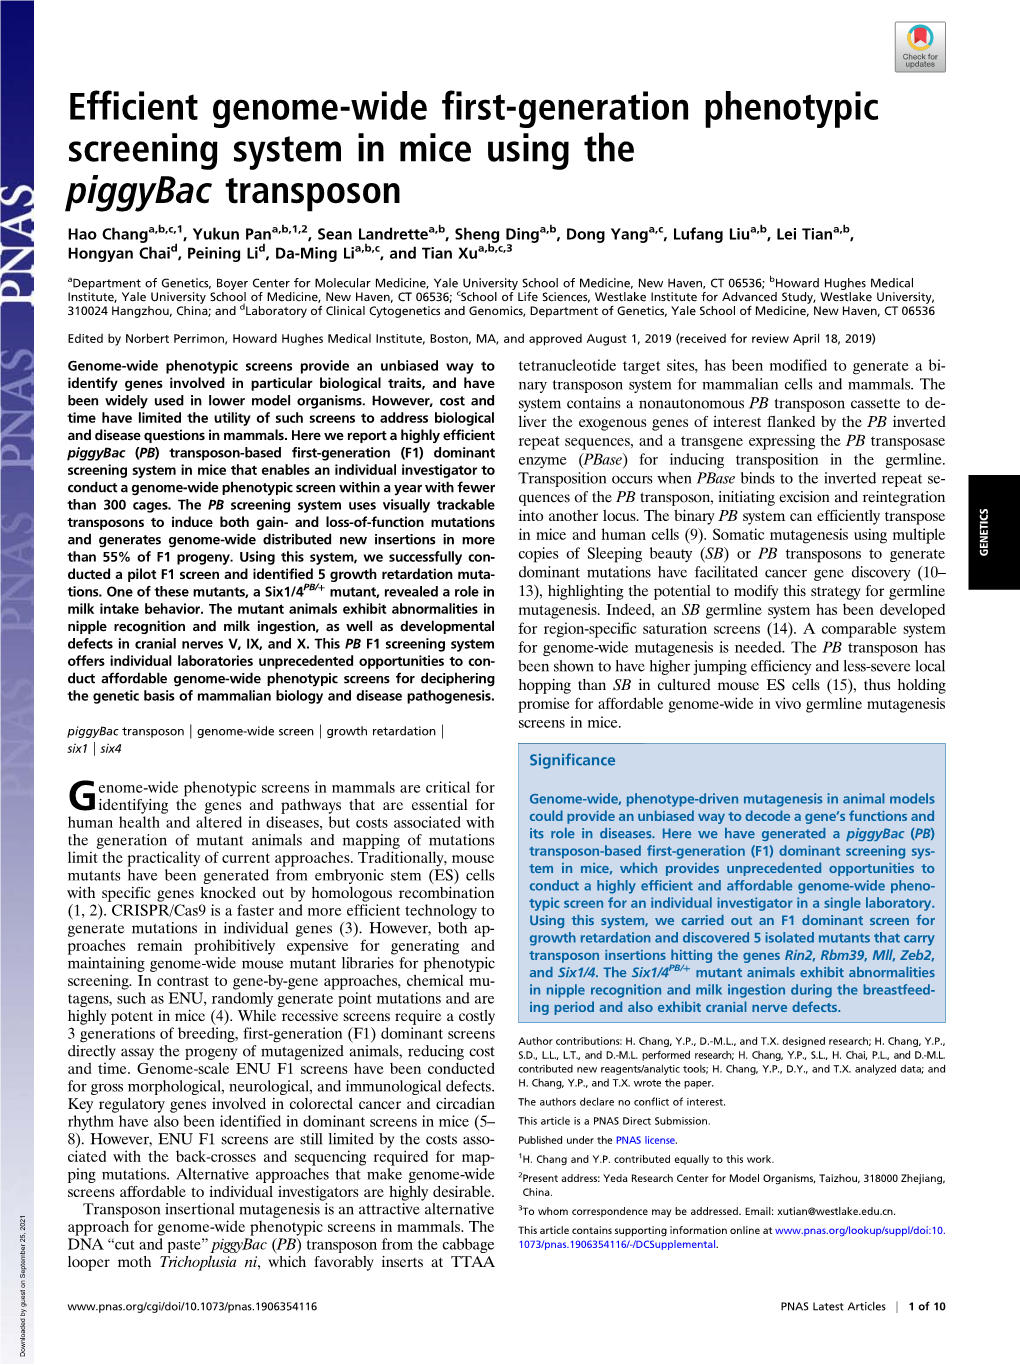 Efficient Genome-Wide First-Generation Phenotypic Screening System in Mice Using the Piggybac Transposon